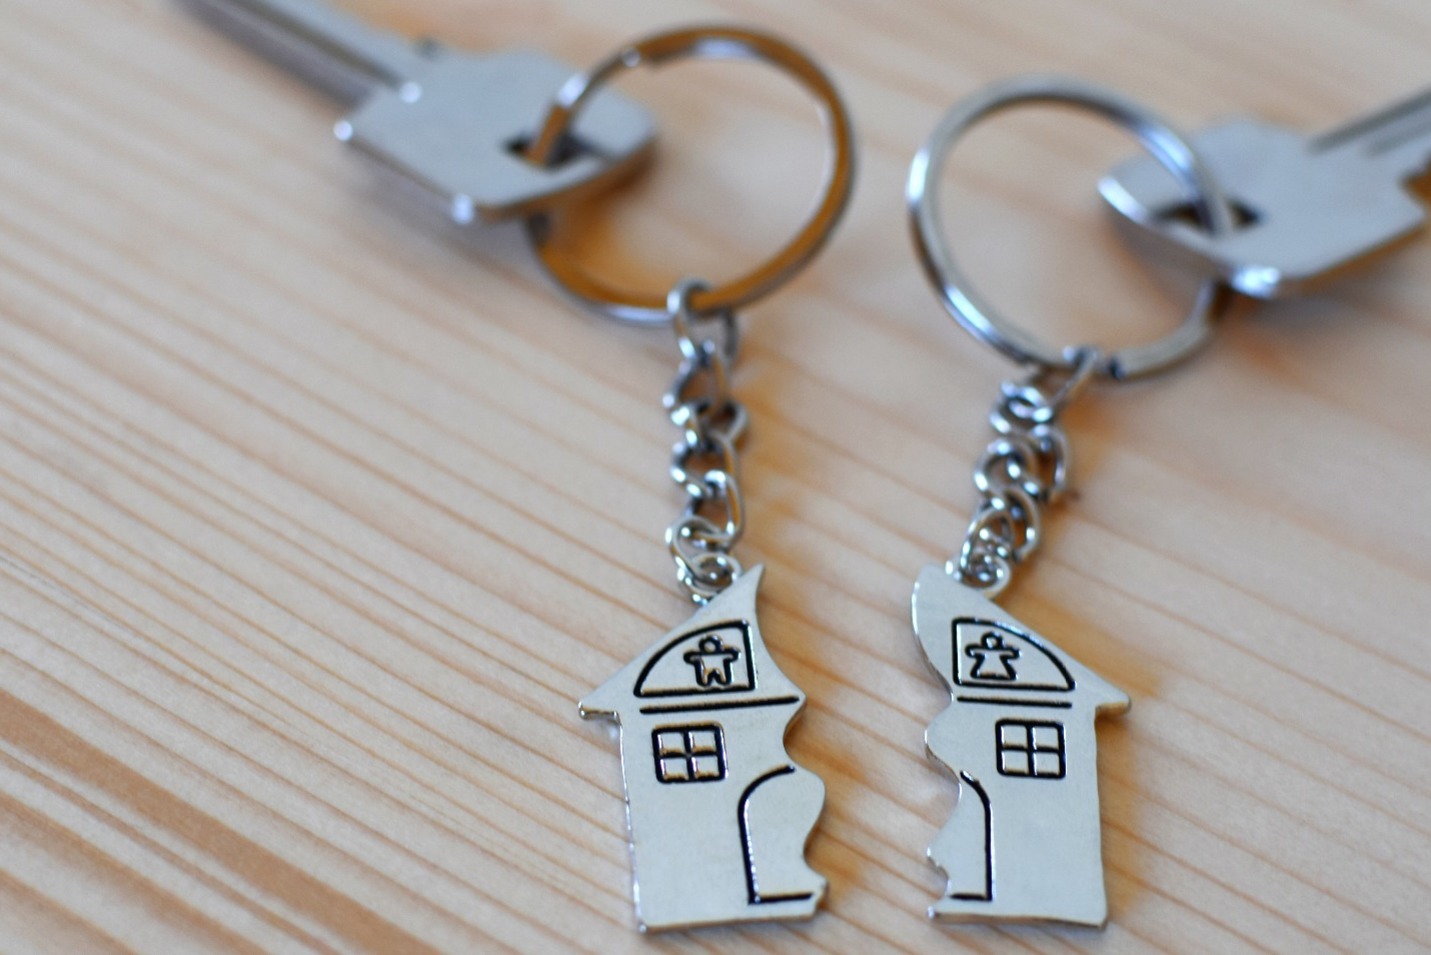 Two keys, each attached to their own keyring showing half of a house.